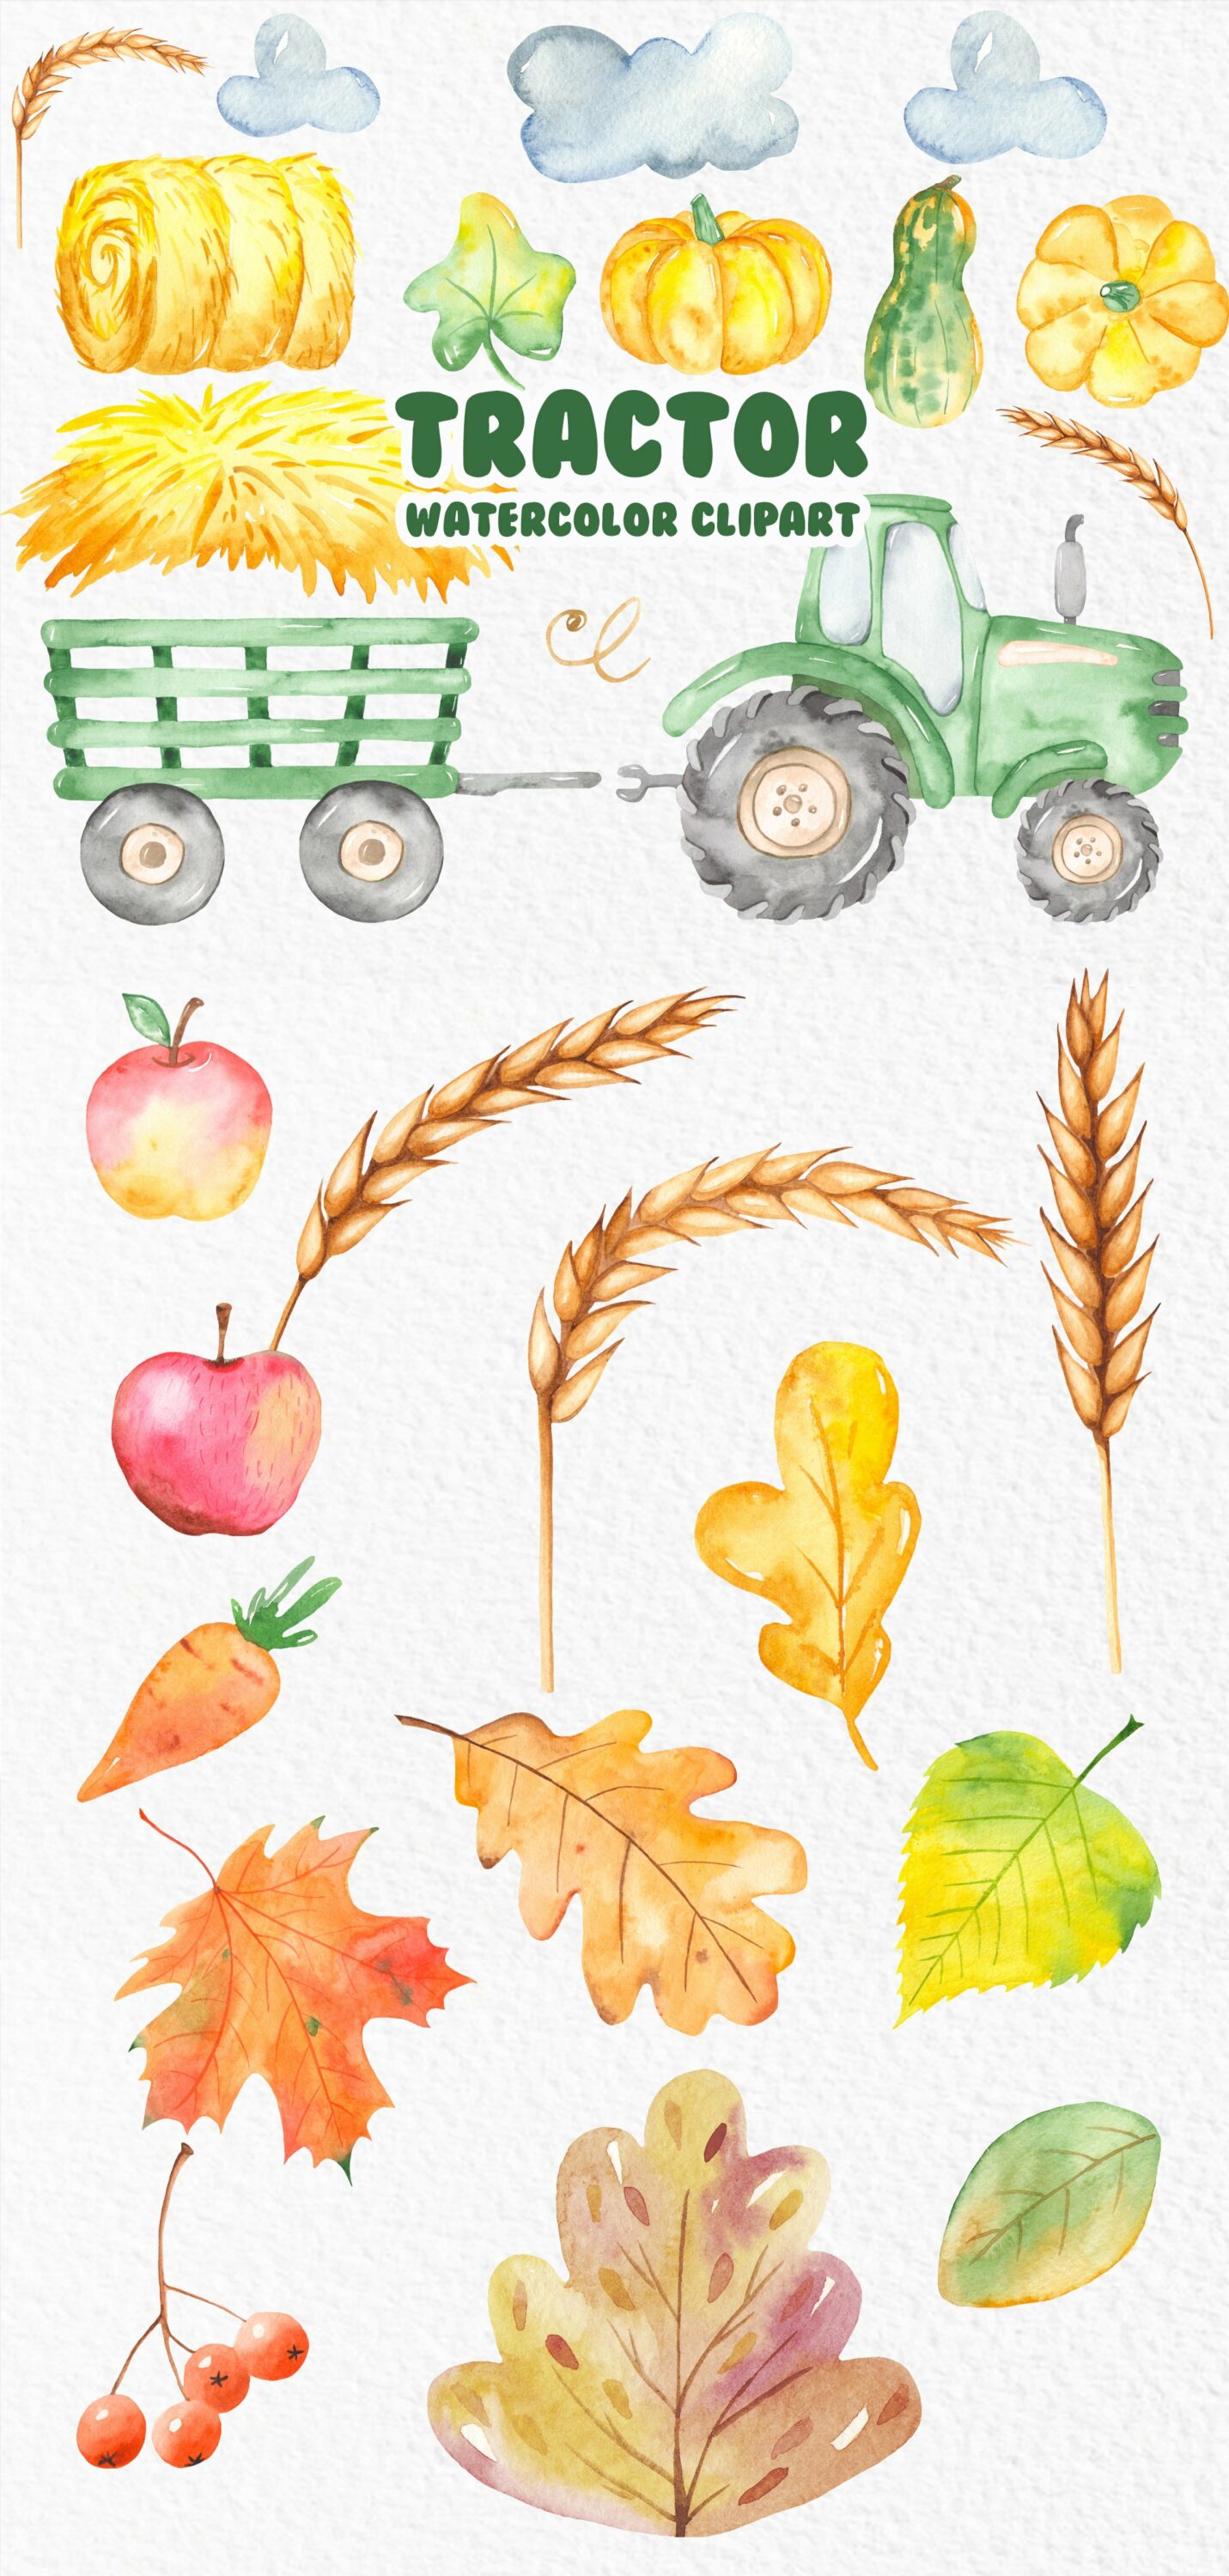 Diverse of tractors and harvesting pumpkin autumn leaves, apples in warm colors.